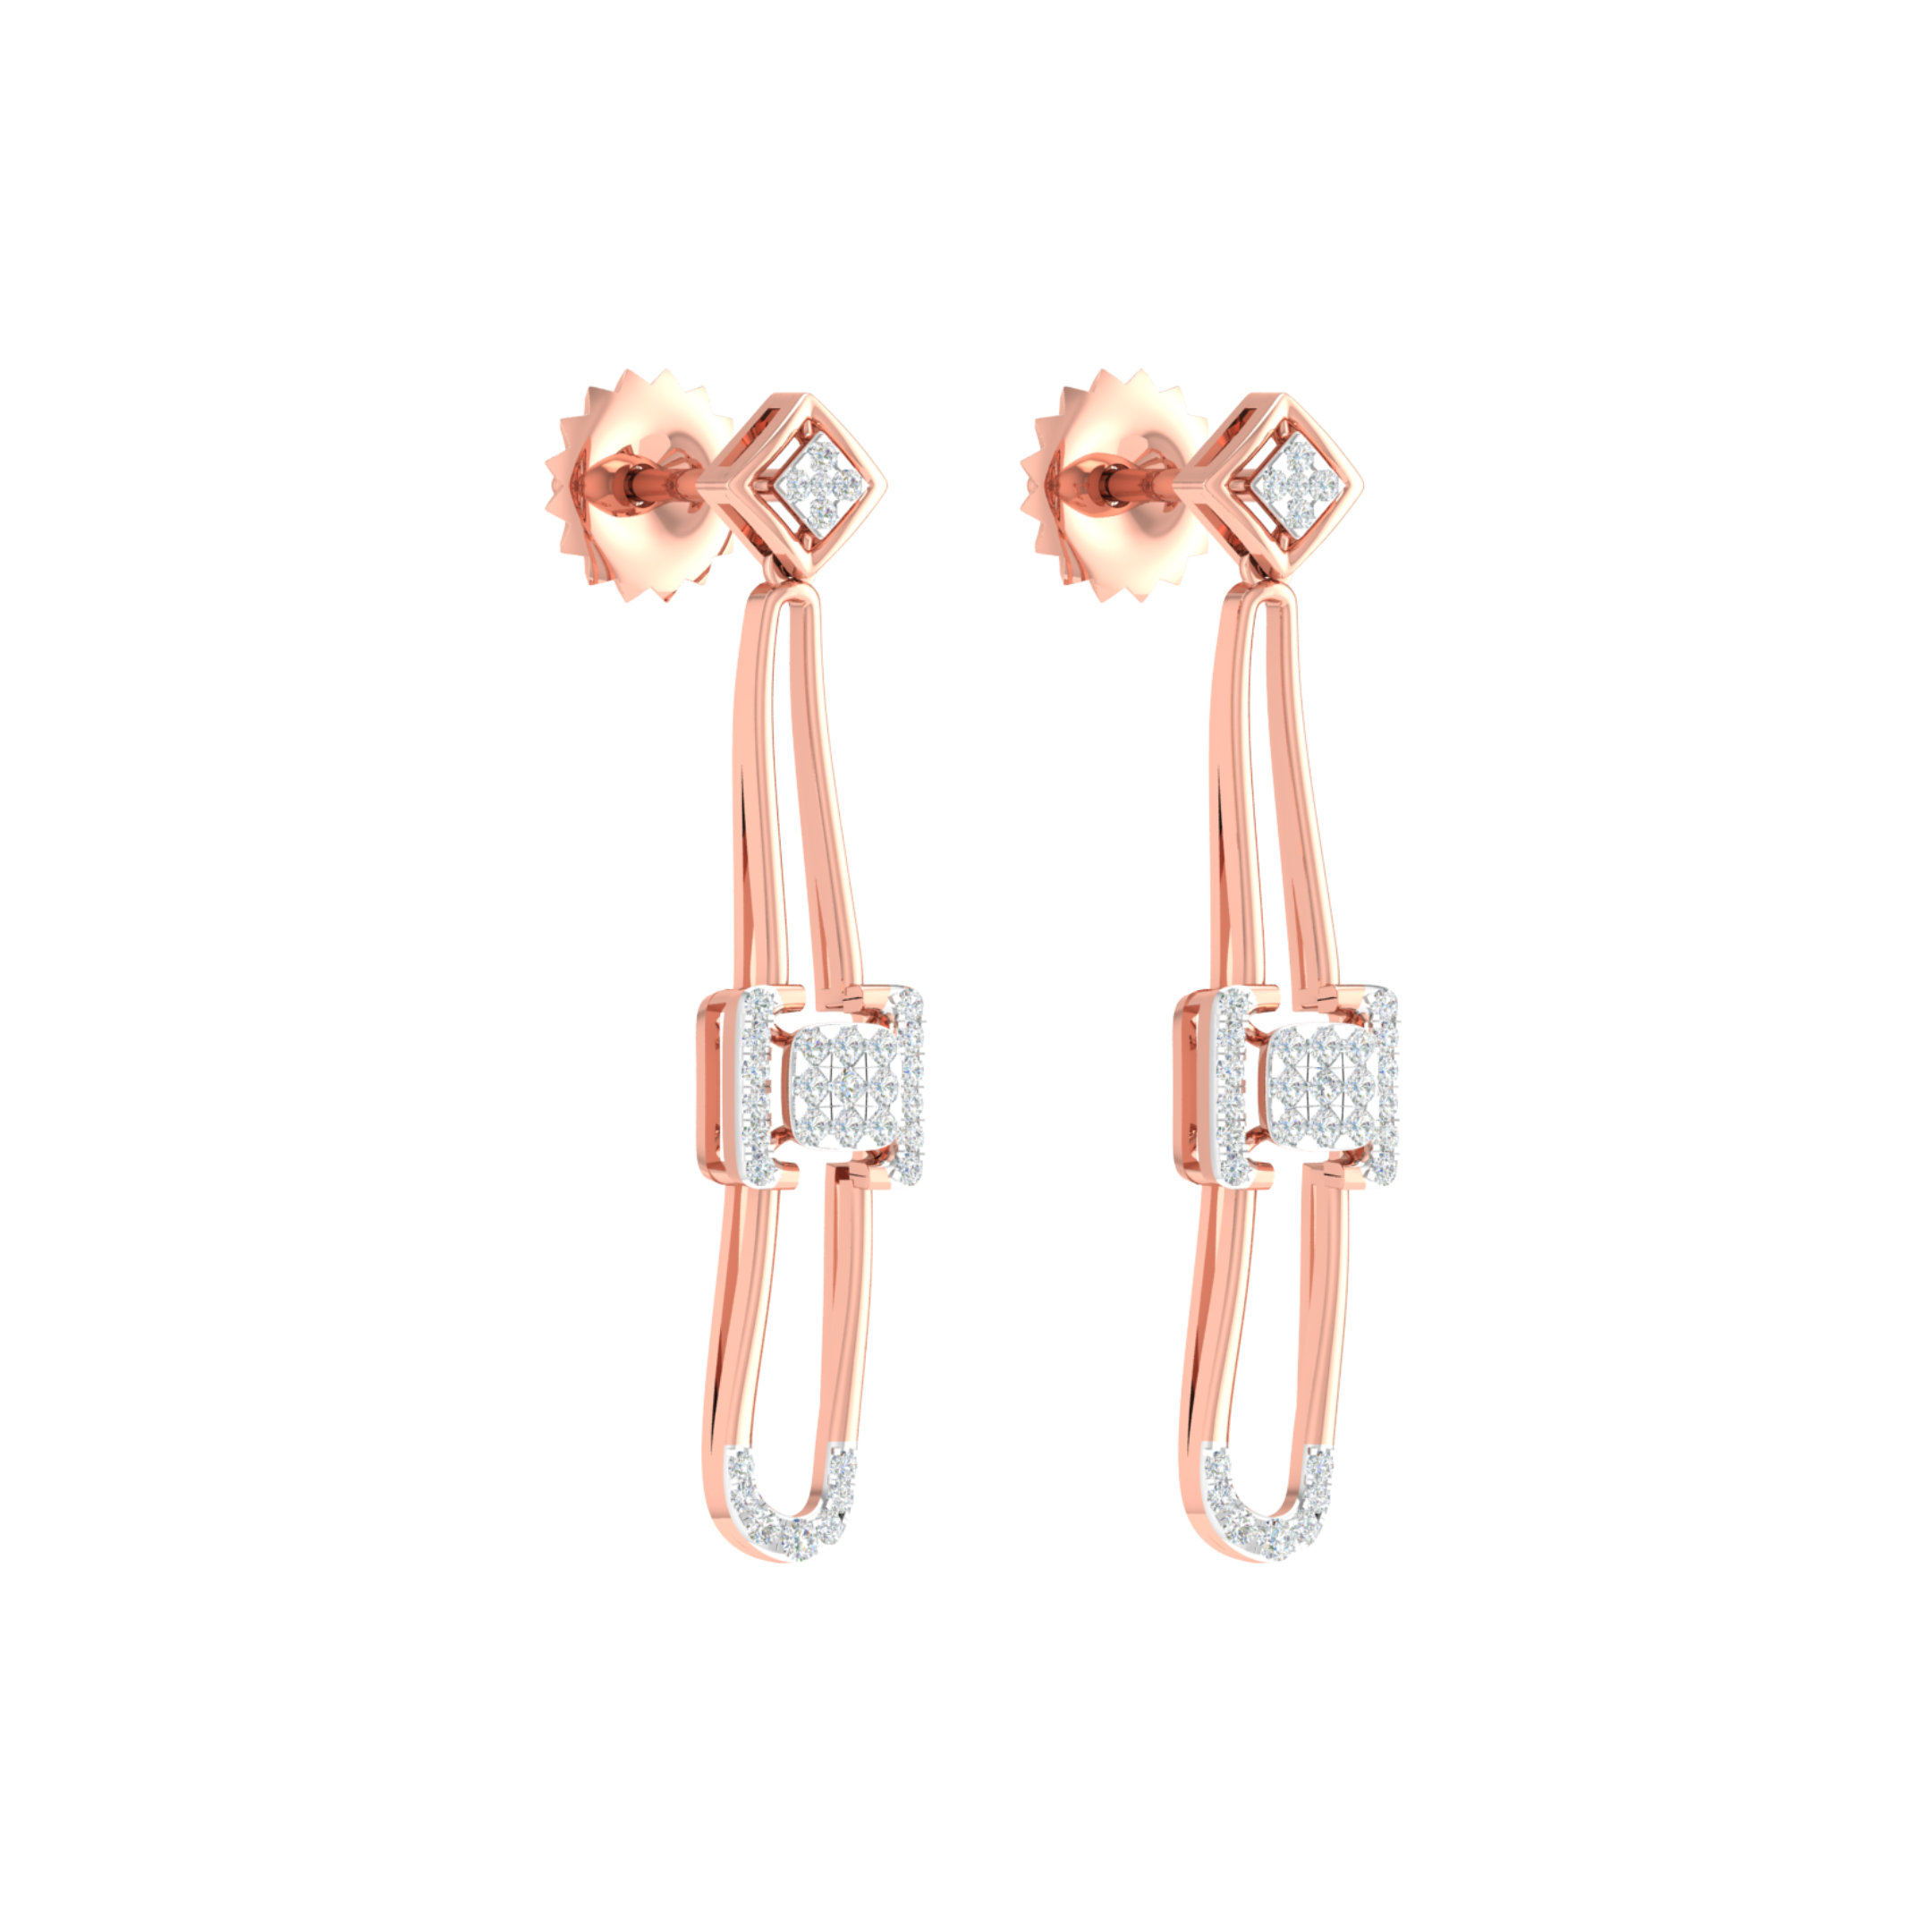 18KT ROSE GOLD VICTORIA REAL DIAMOND EARRINGS